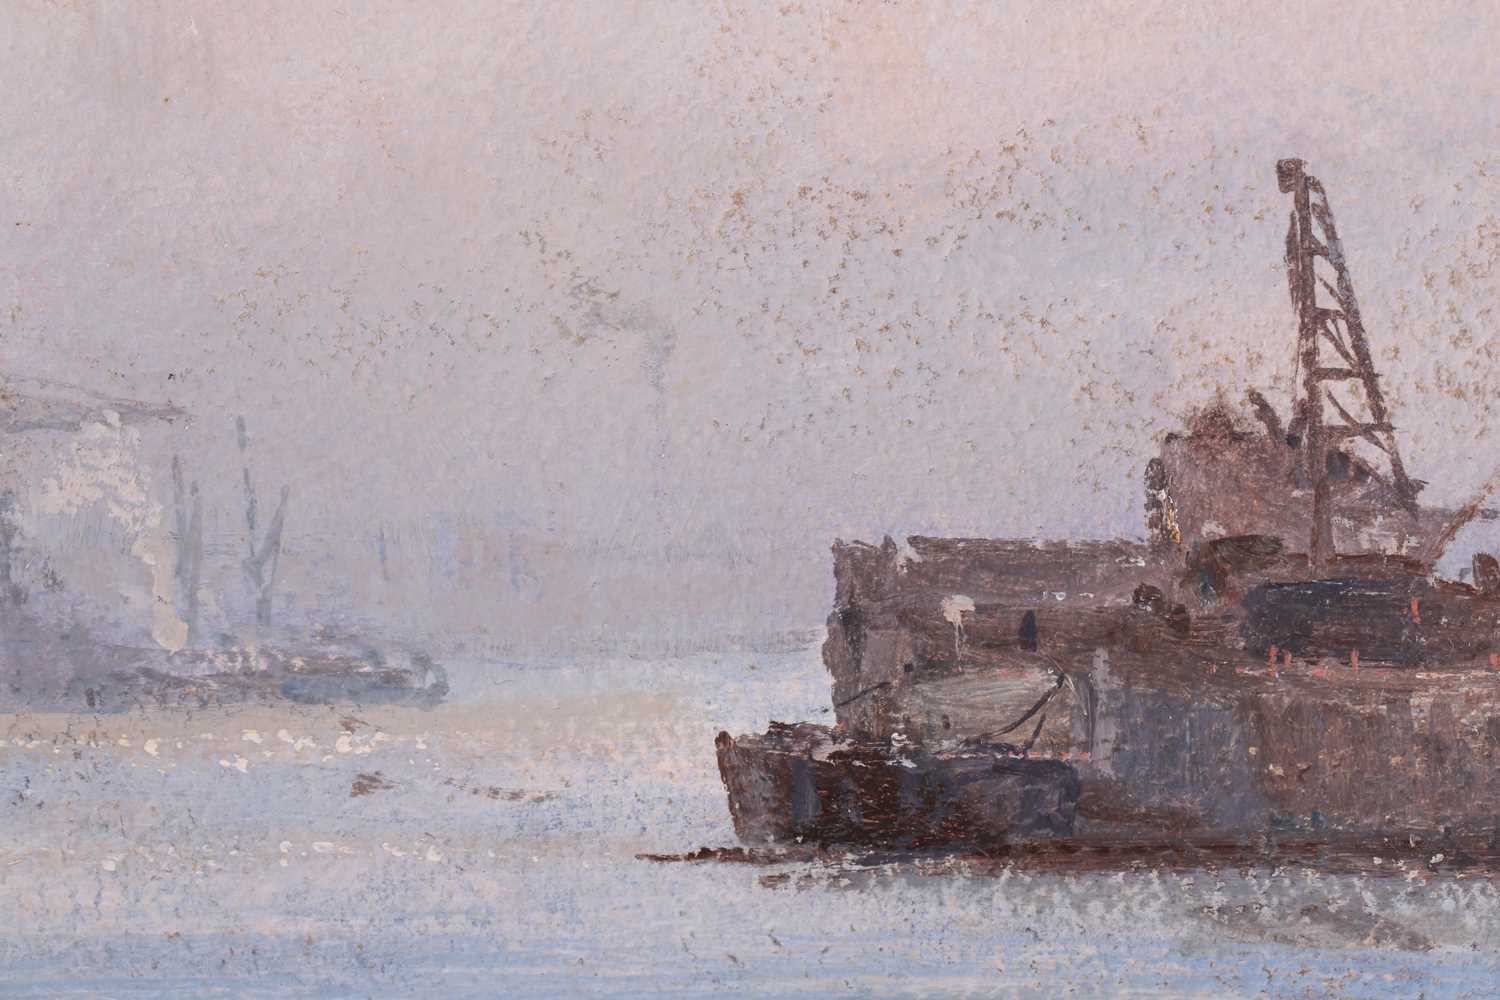 Arthur Burgess RI, ROI (1859-1957) British, 'Sugar and Spice', boats in an estuary, oil on panel, - Image 3 of 13